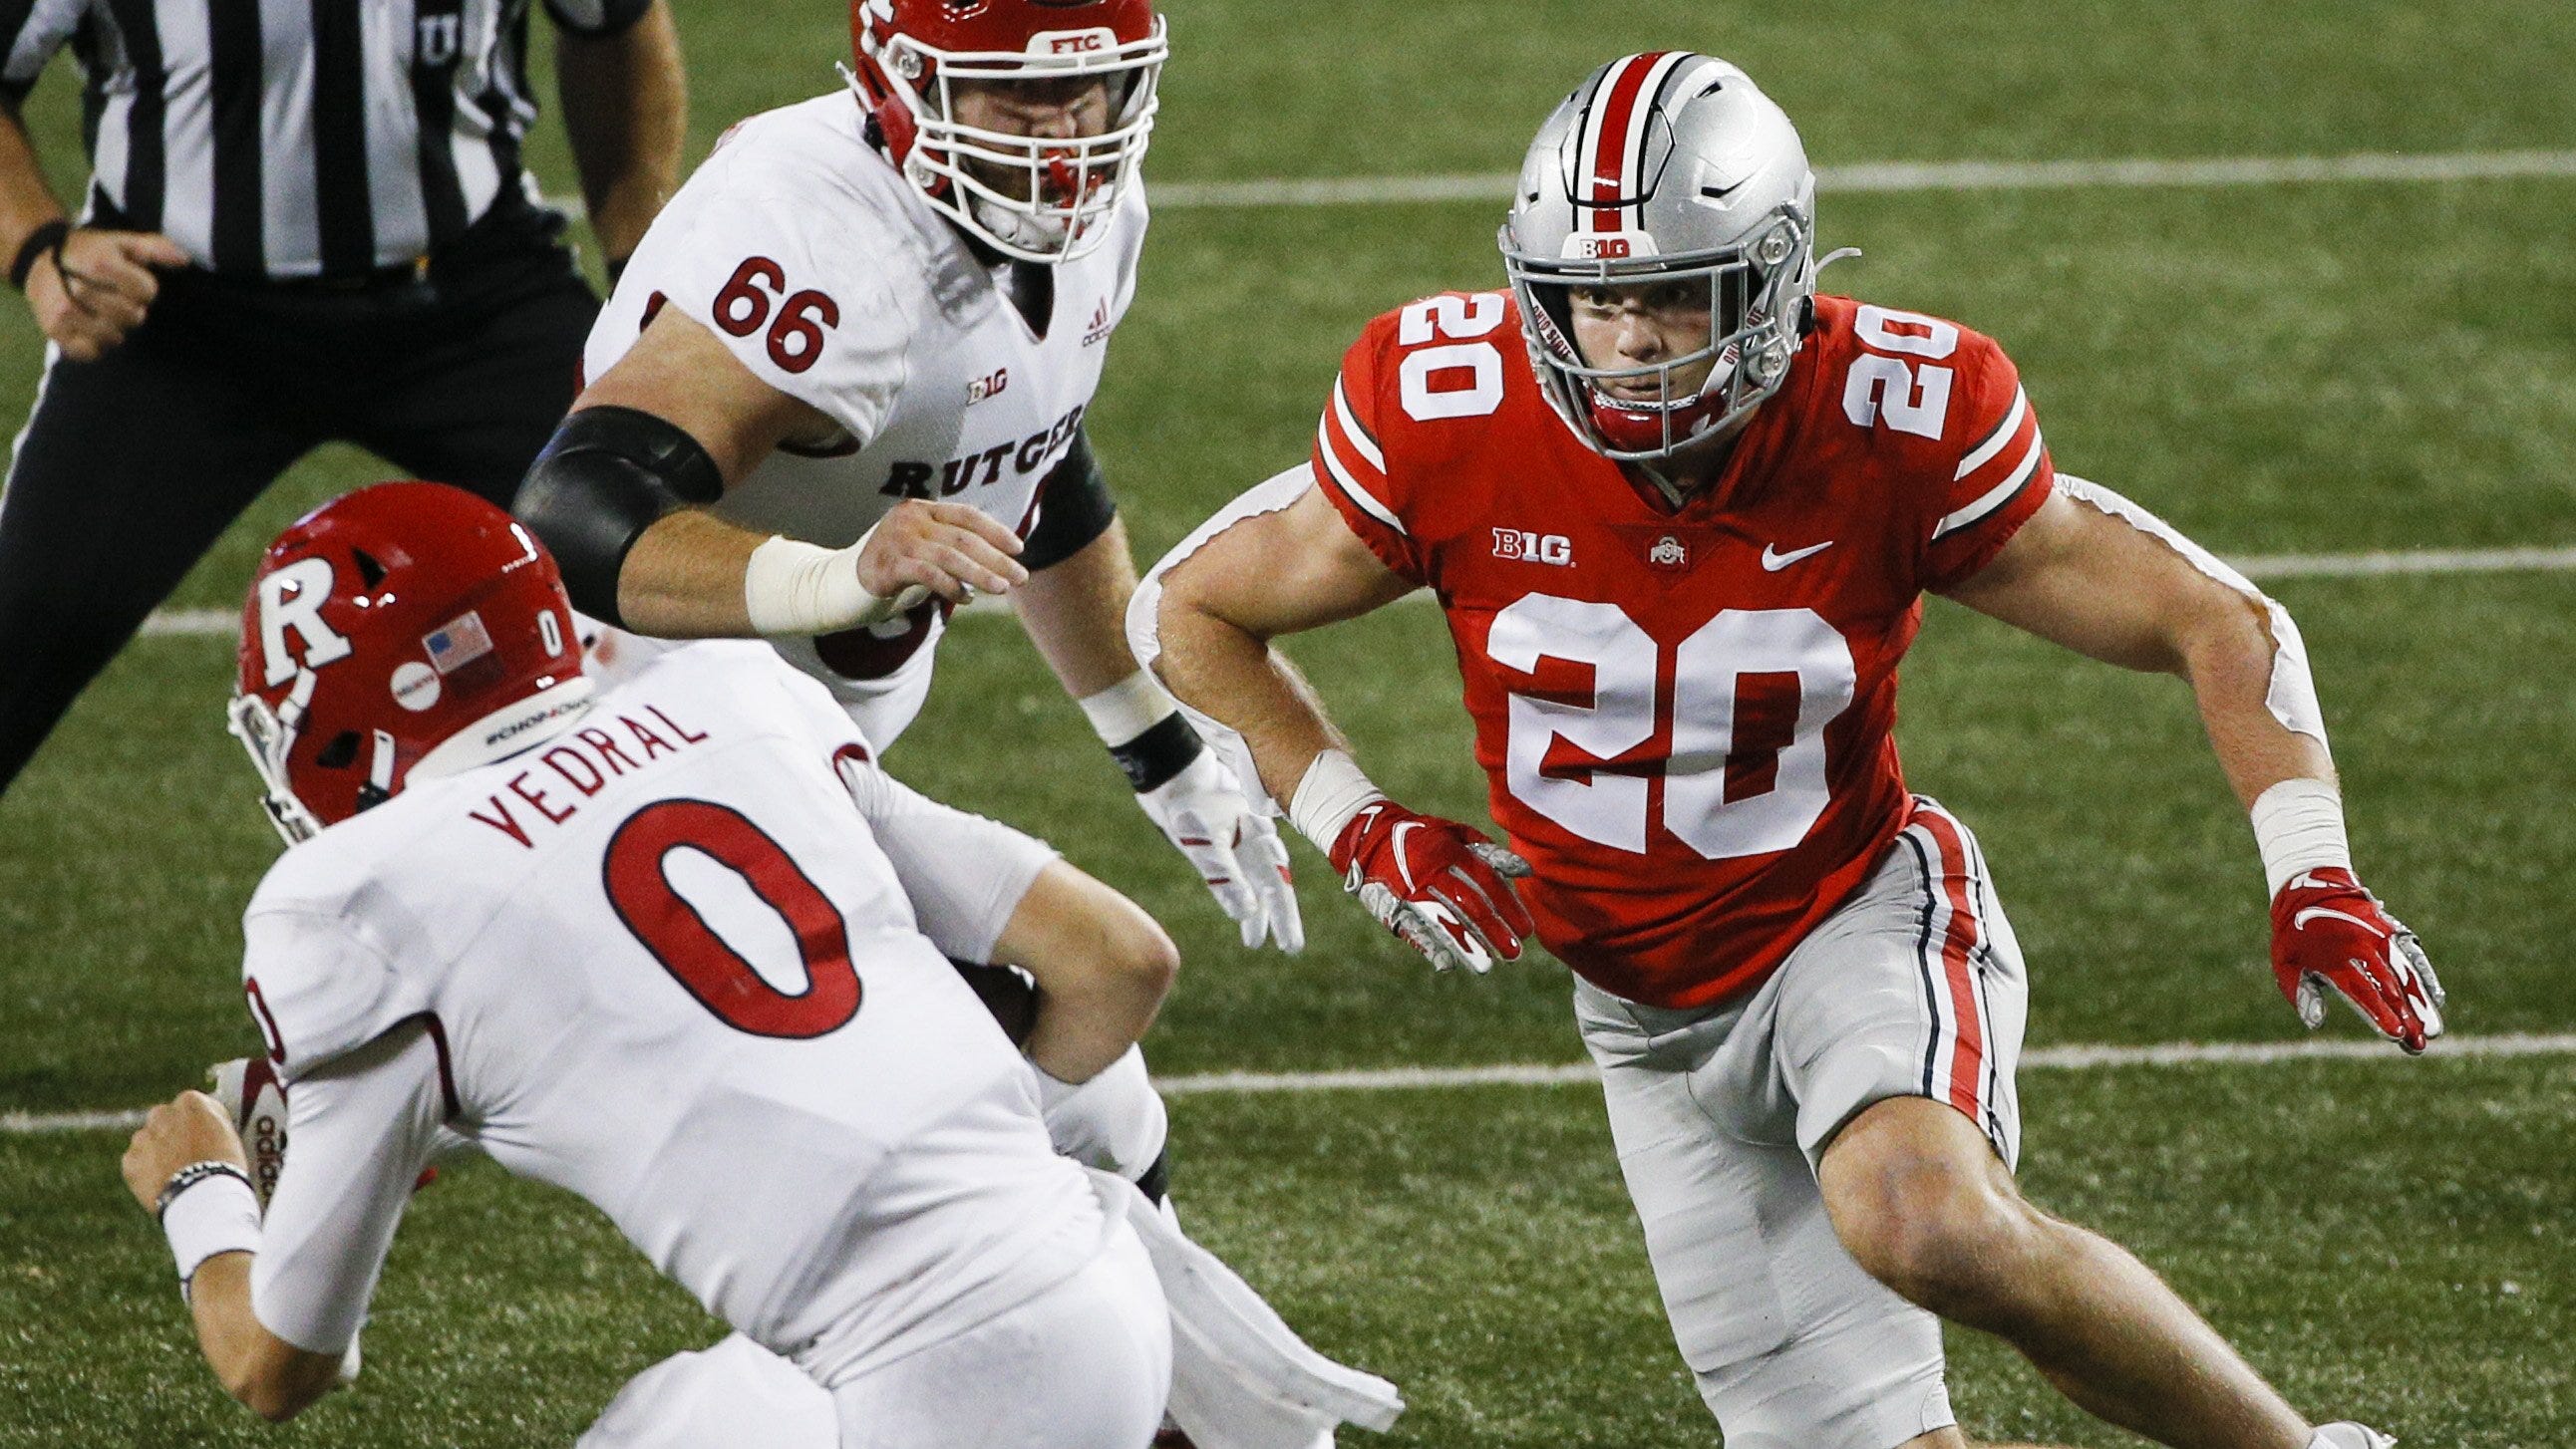 Pete Werner: 3 things to know about the Ohio State linebacker